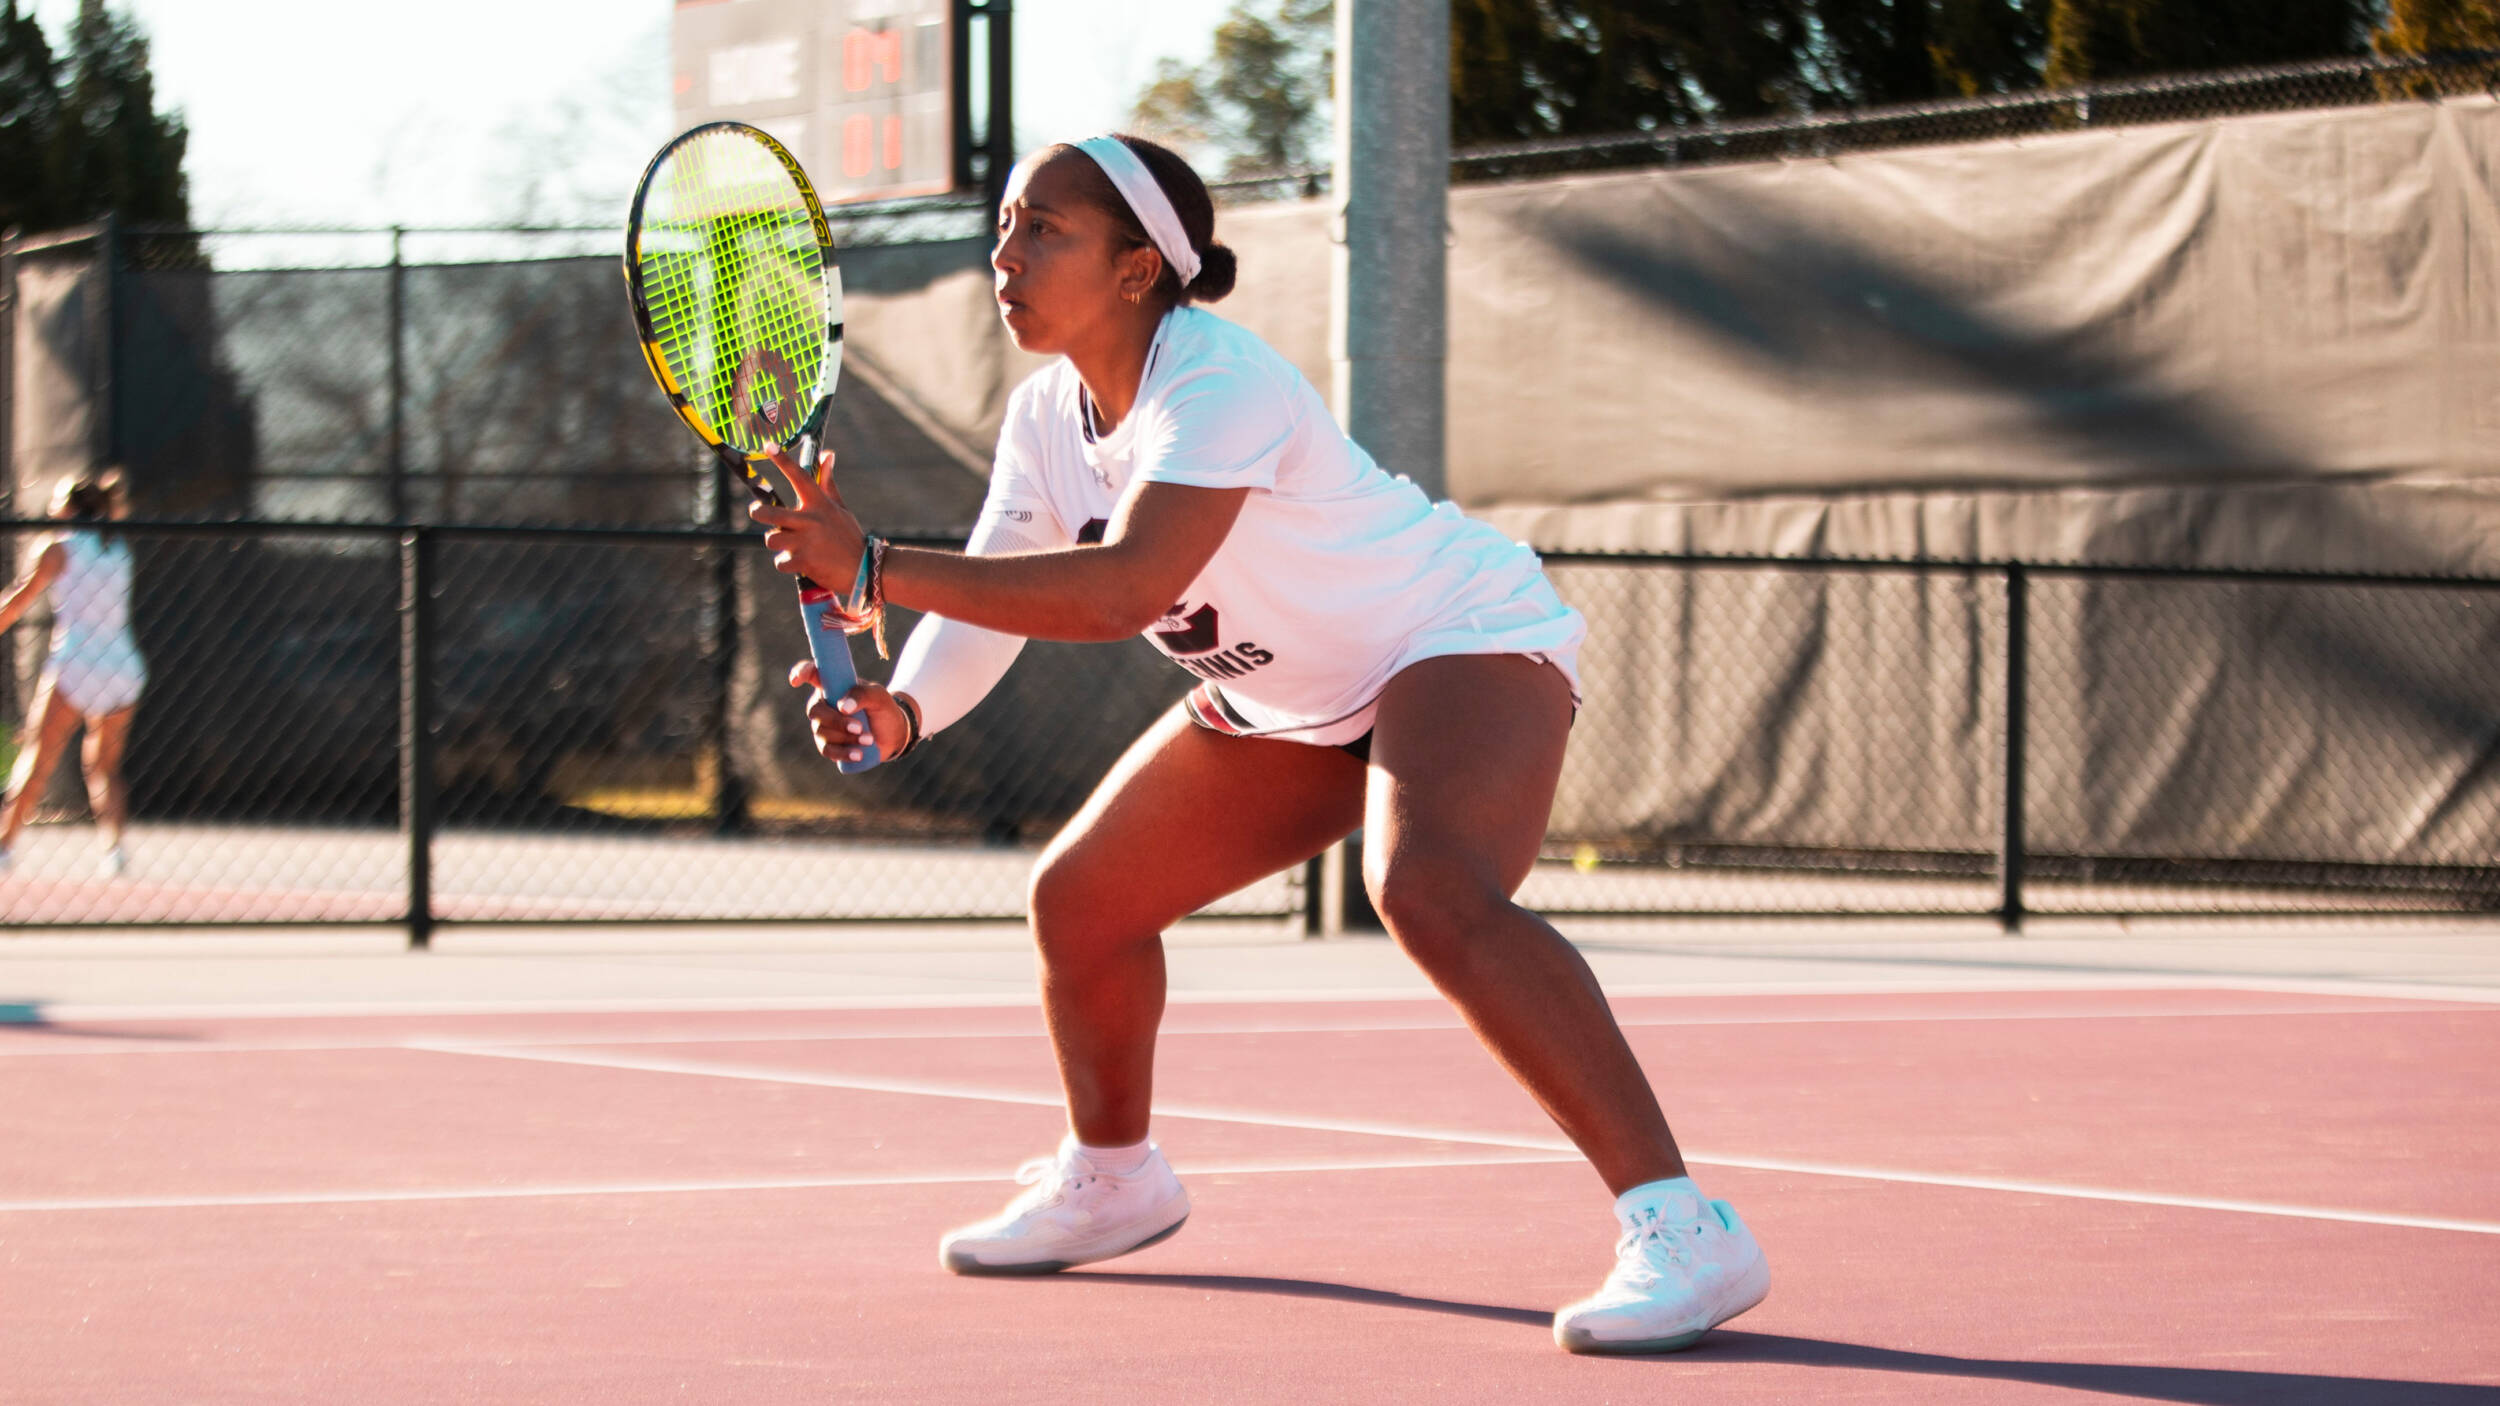 Women’s Tennis Welcomes Pair of Teams for Doubleheader